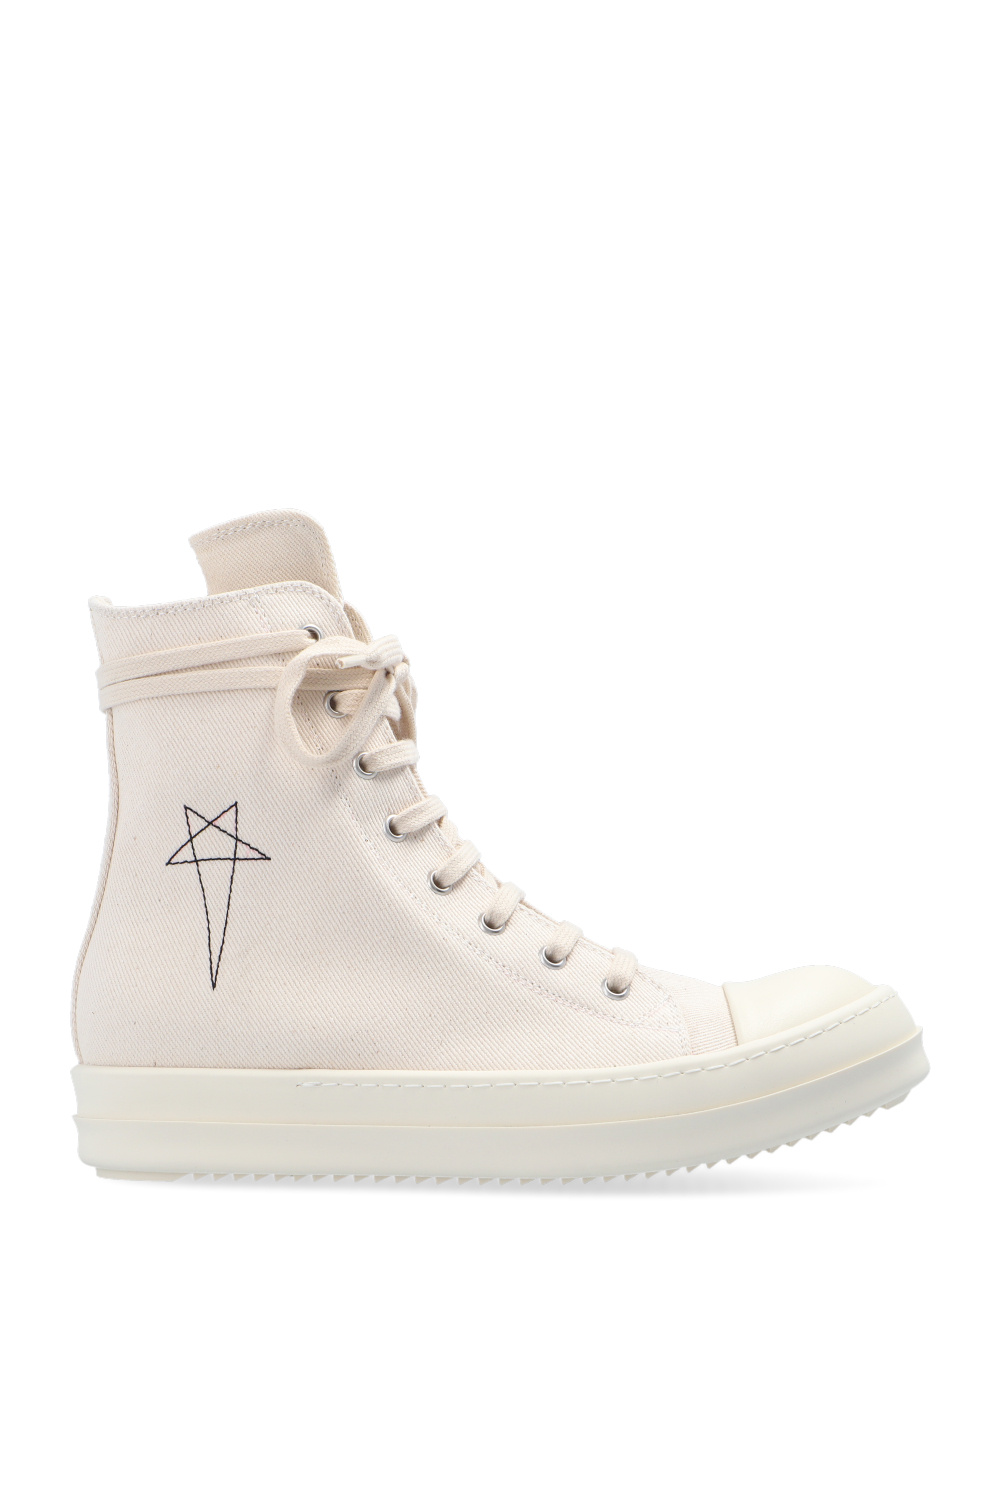 Cream High-top sneakers with logo Rick Owens DRKSHDW - Vitkac Canada